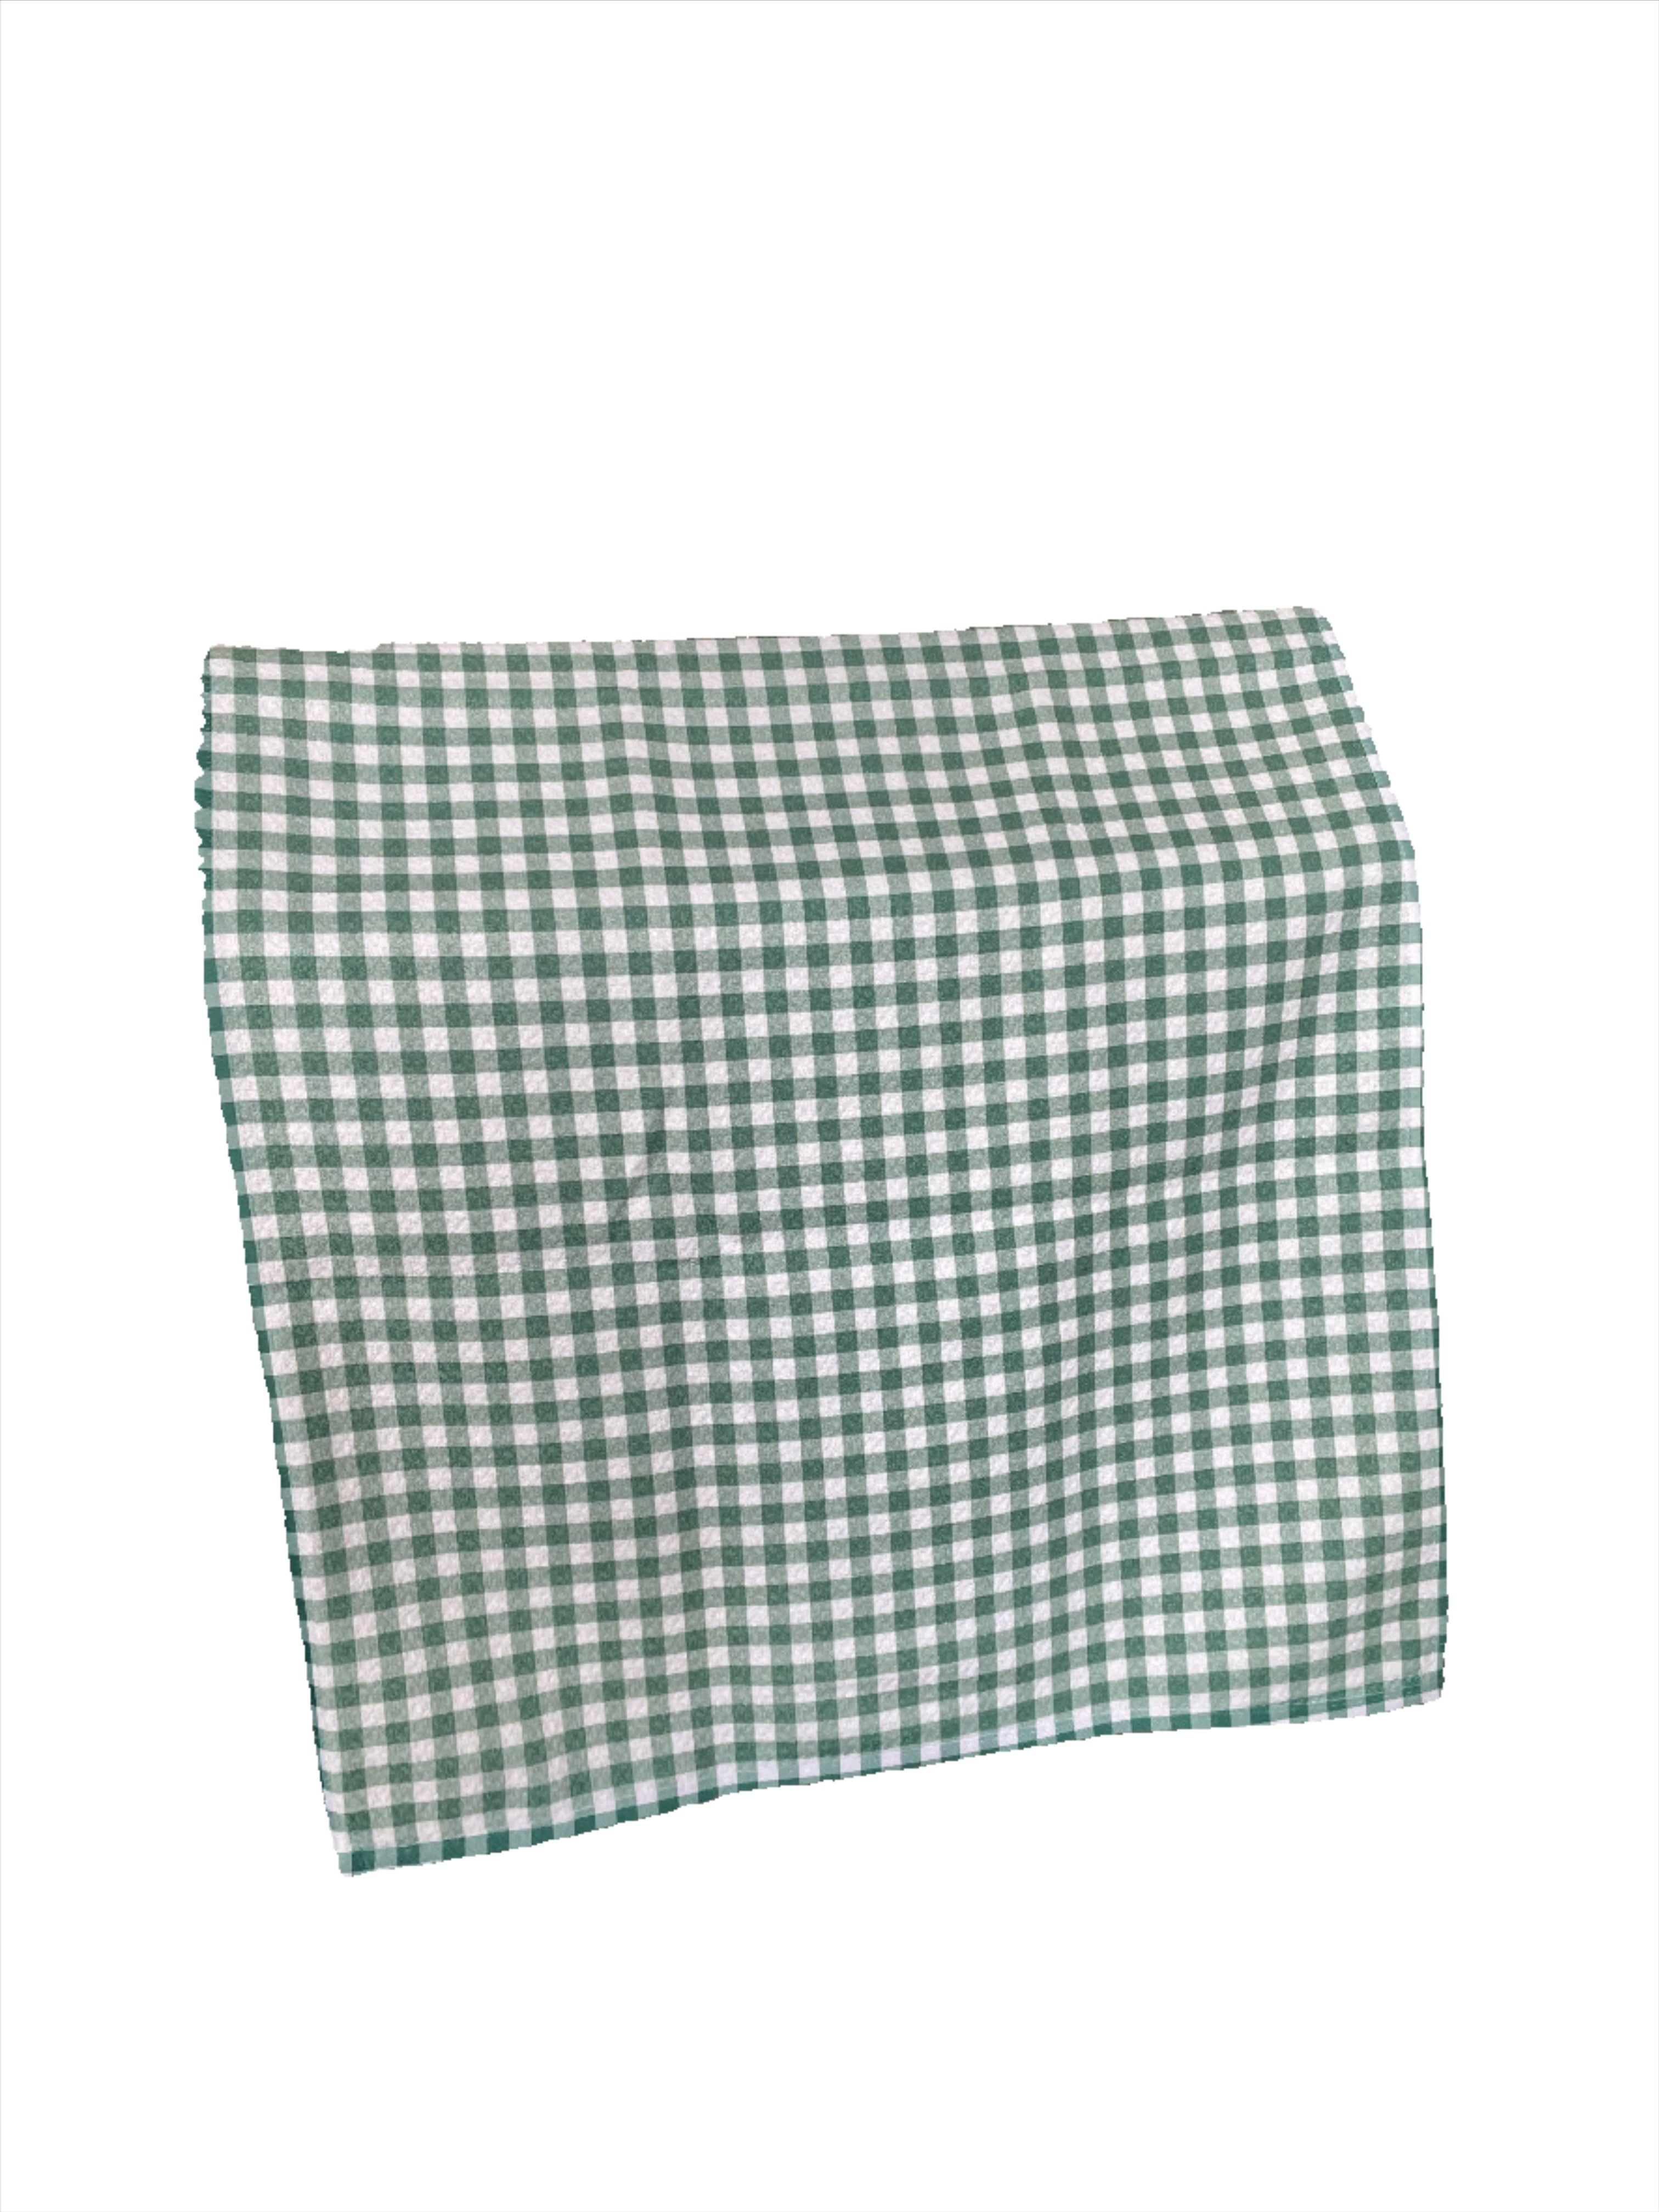 Country Green Gingham Towel